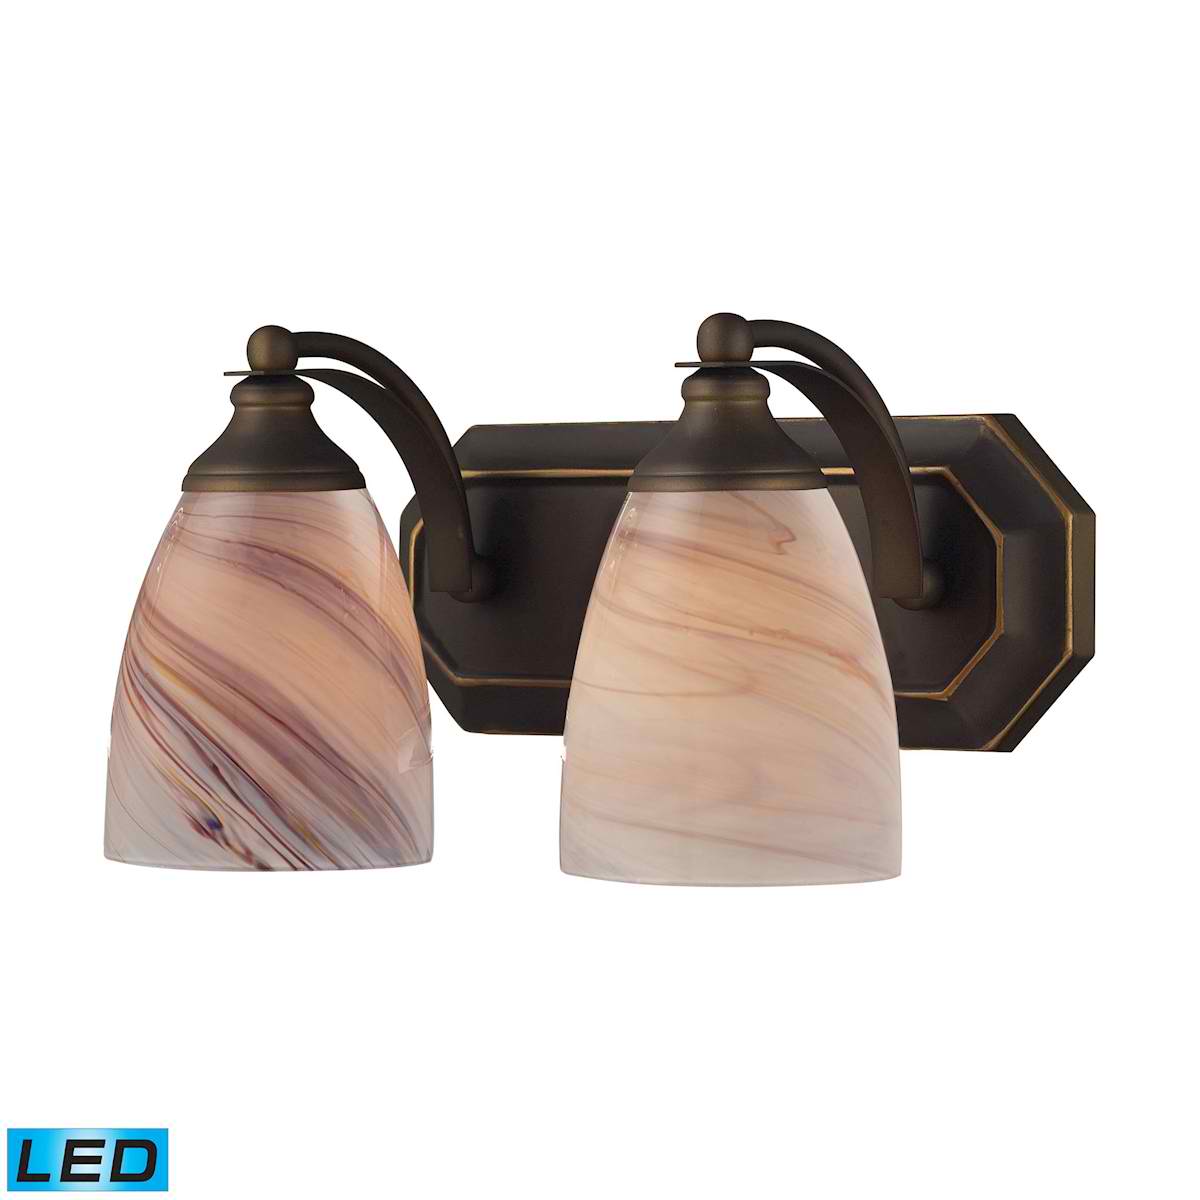 2 Light Vanity in Aged Bronze and Creme Glass - LED, 800 Lumens (1600 Lumens Total) with Full Scale